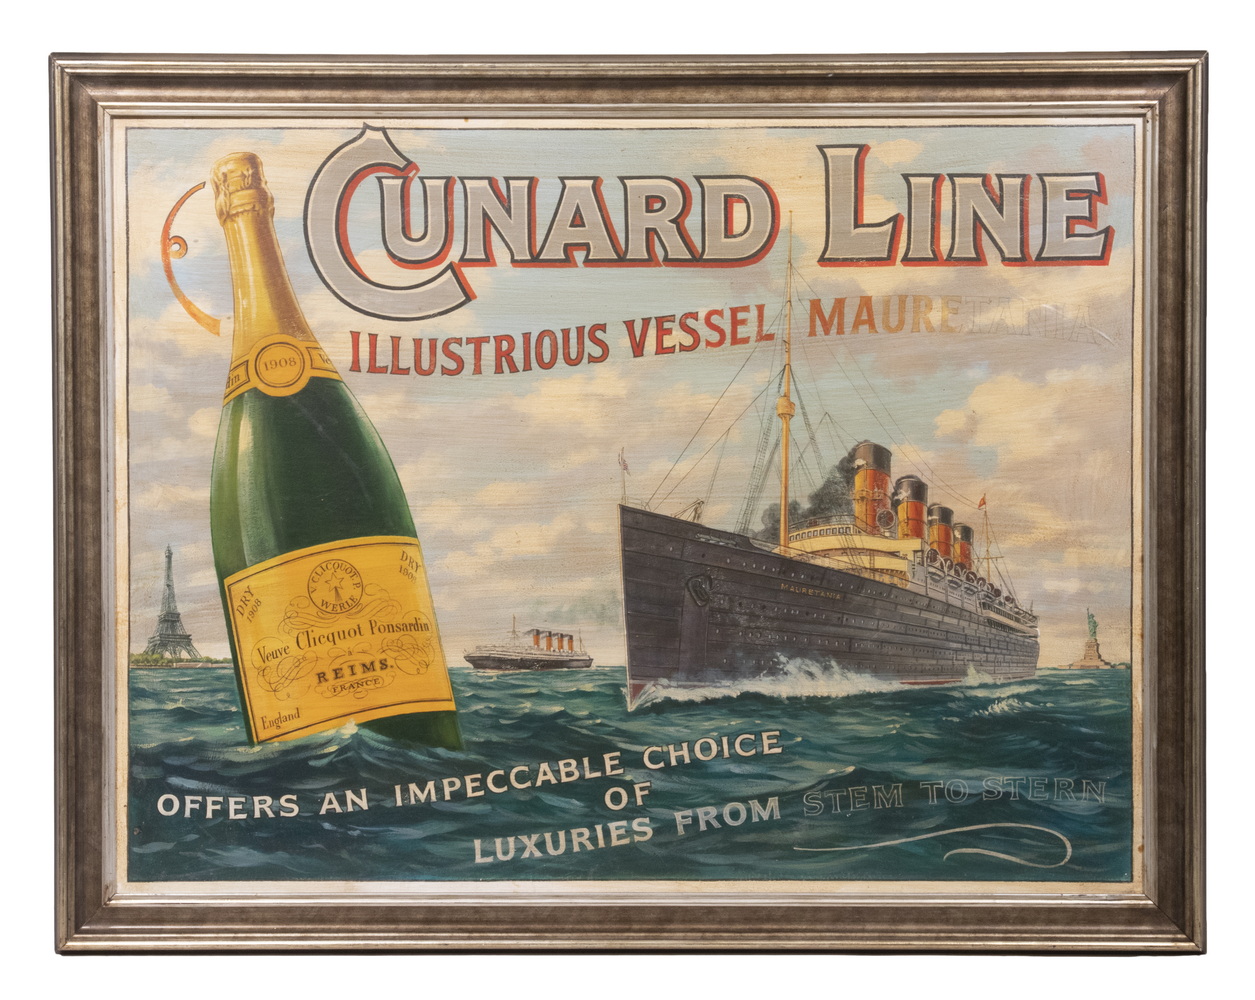 LARGE CHAMPAGNE ADVERTISEMENT WITH